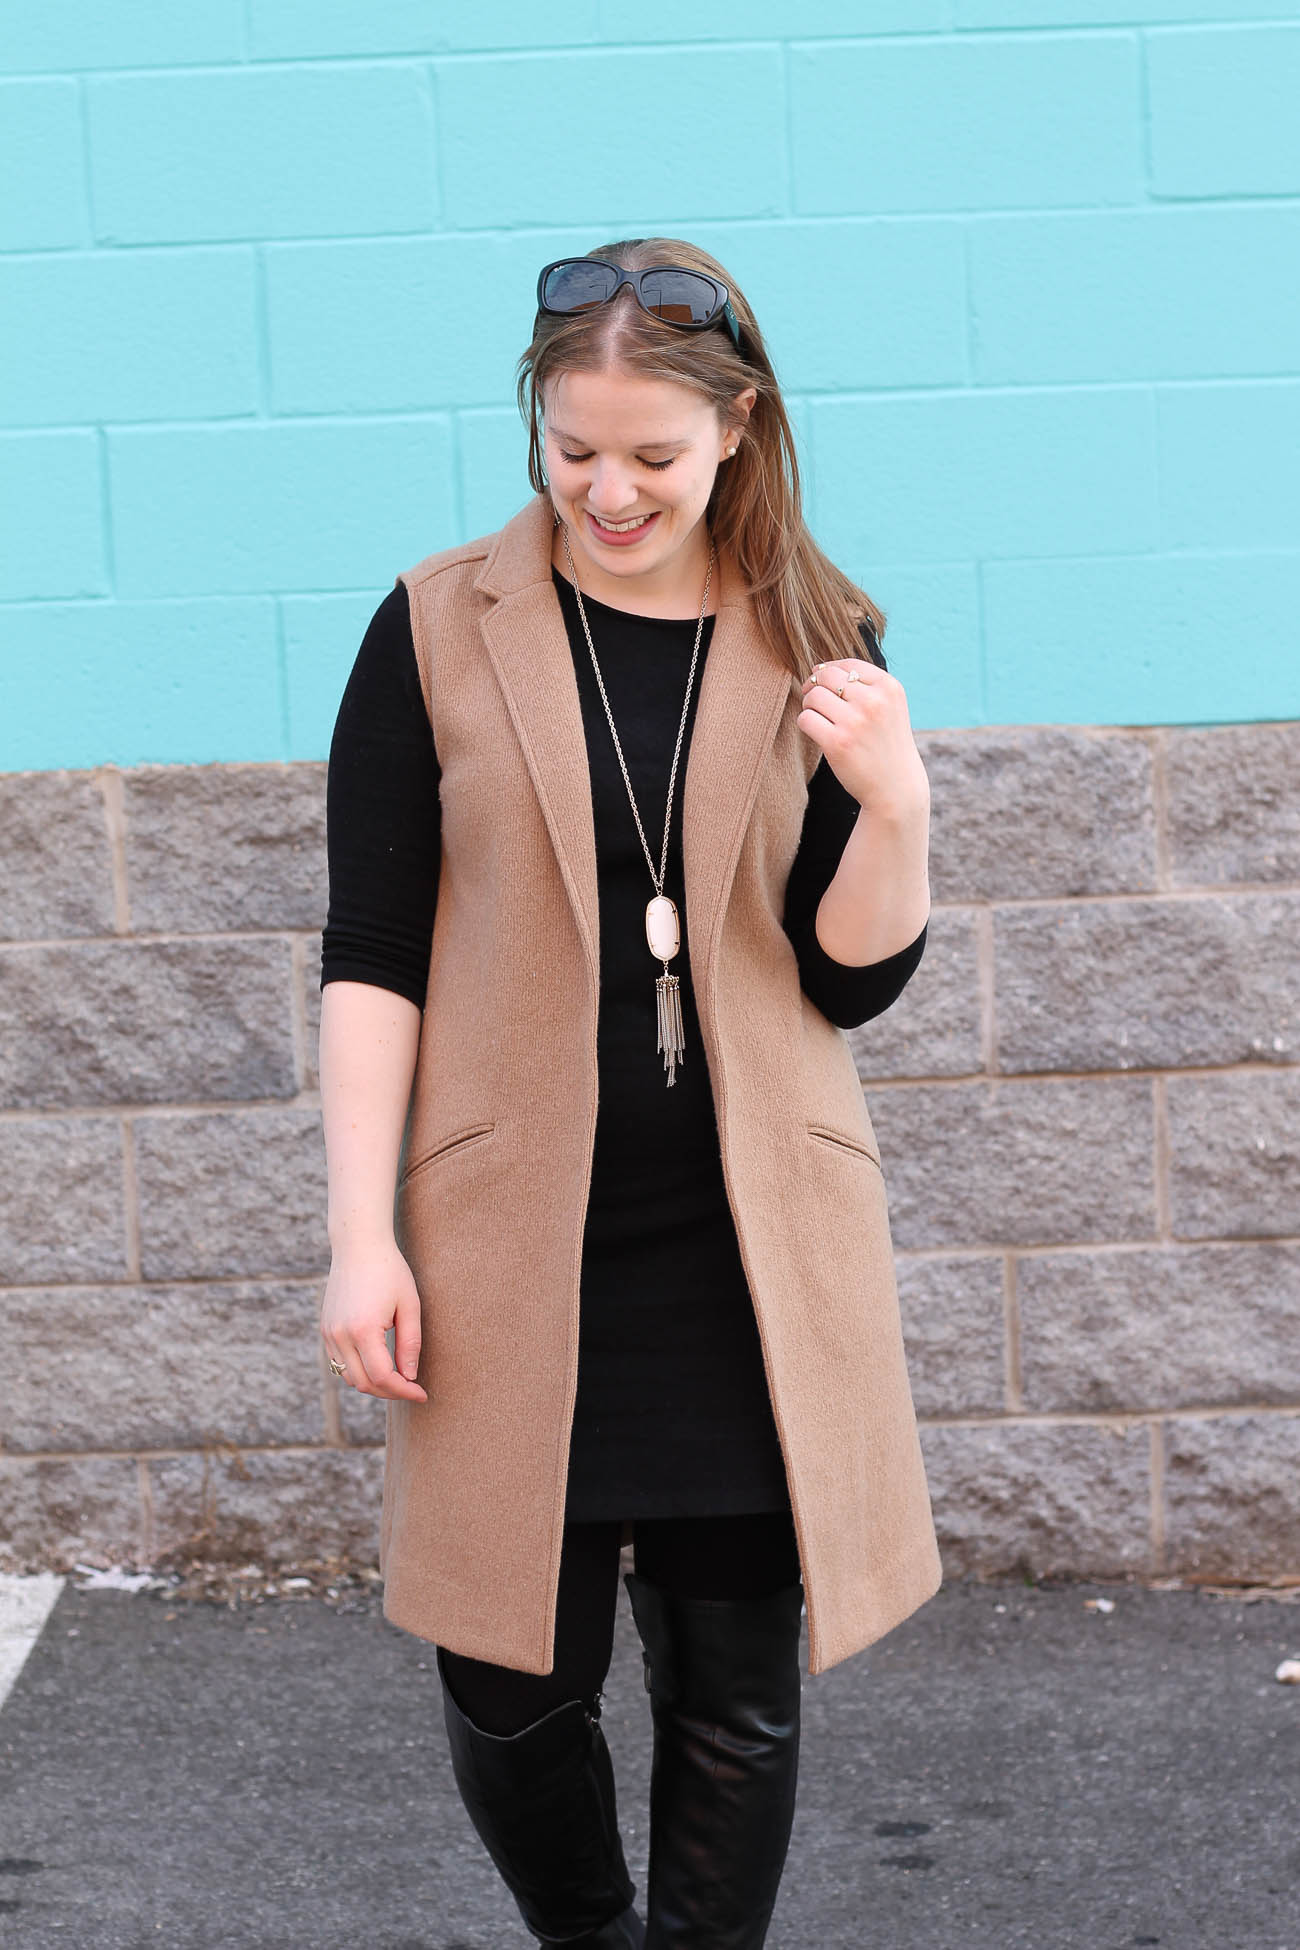 The Little Black Work Dress | Something Good, women, fashion, clothing, style, clothes, little black dress, camel sleeveless trench, gap vest, old navy dress, over the knee boots, black leather boots, kendra scott necklace, work outfit, fall outfit